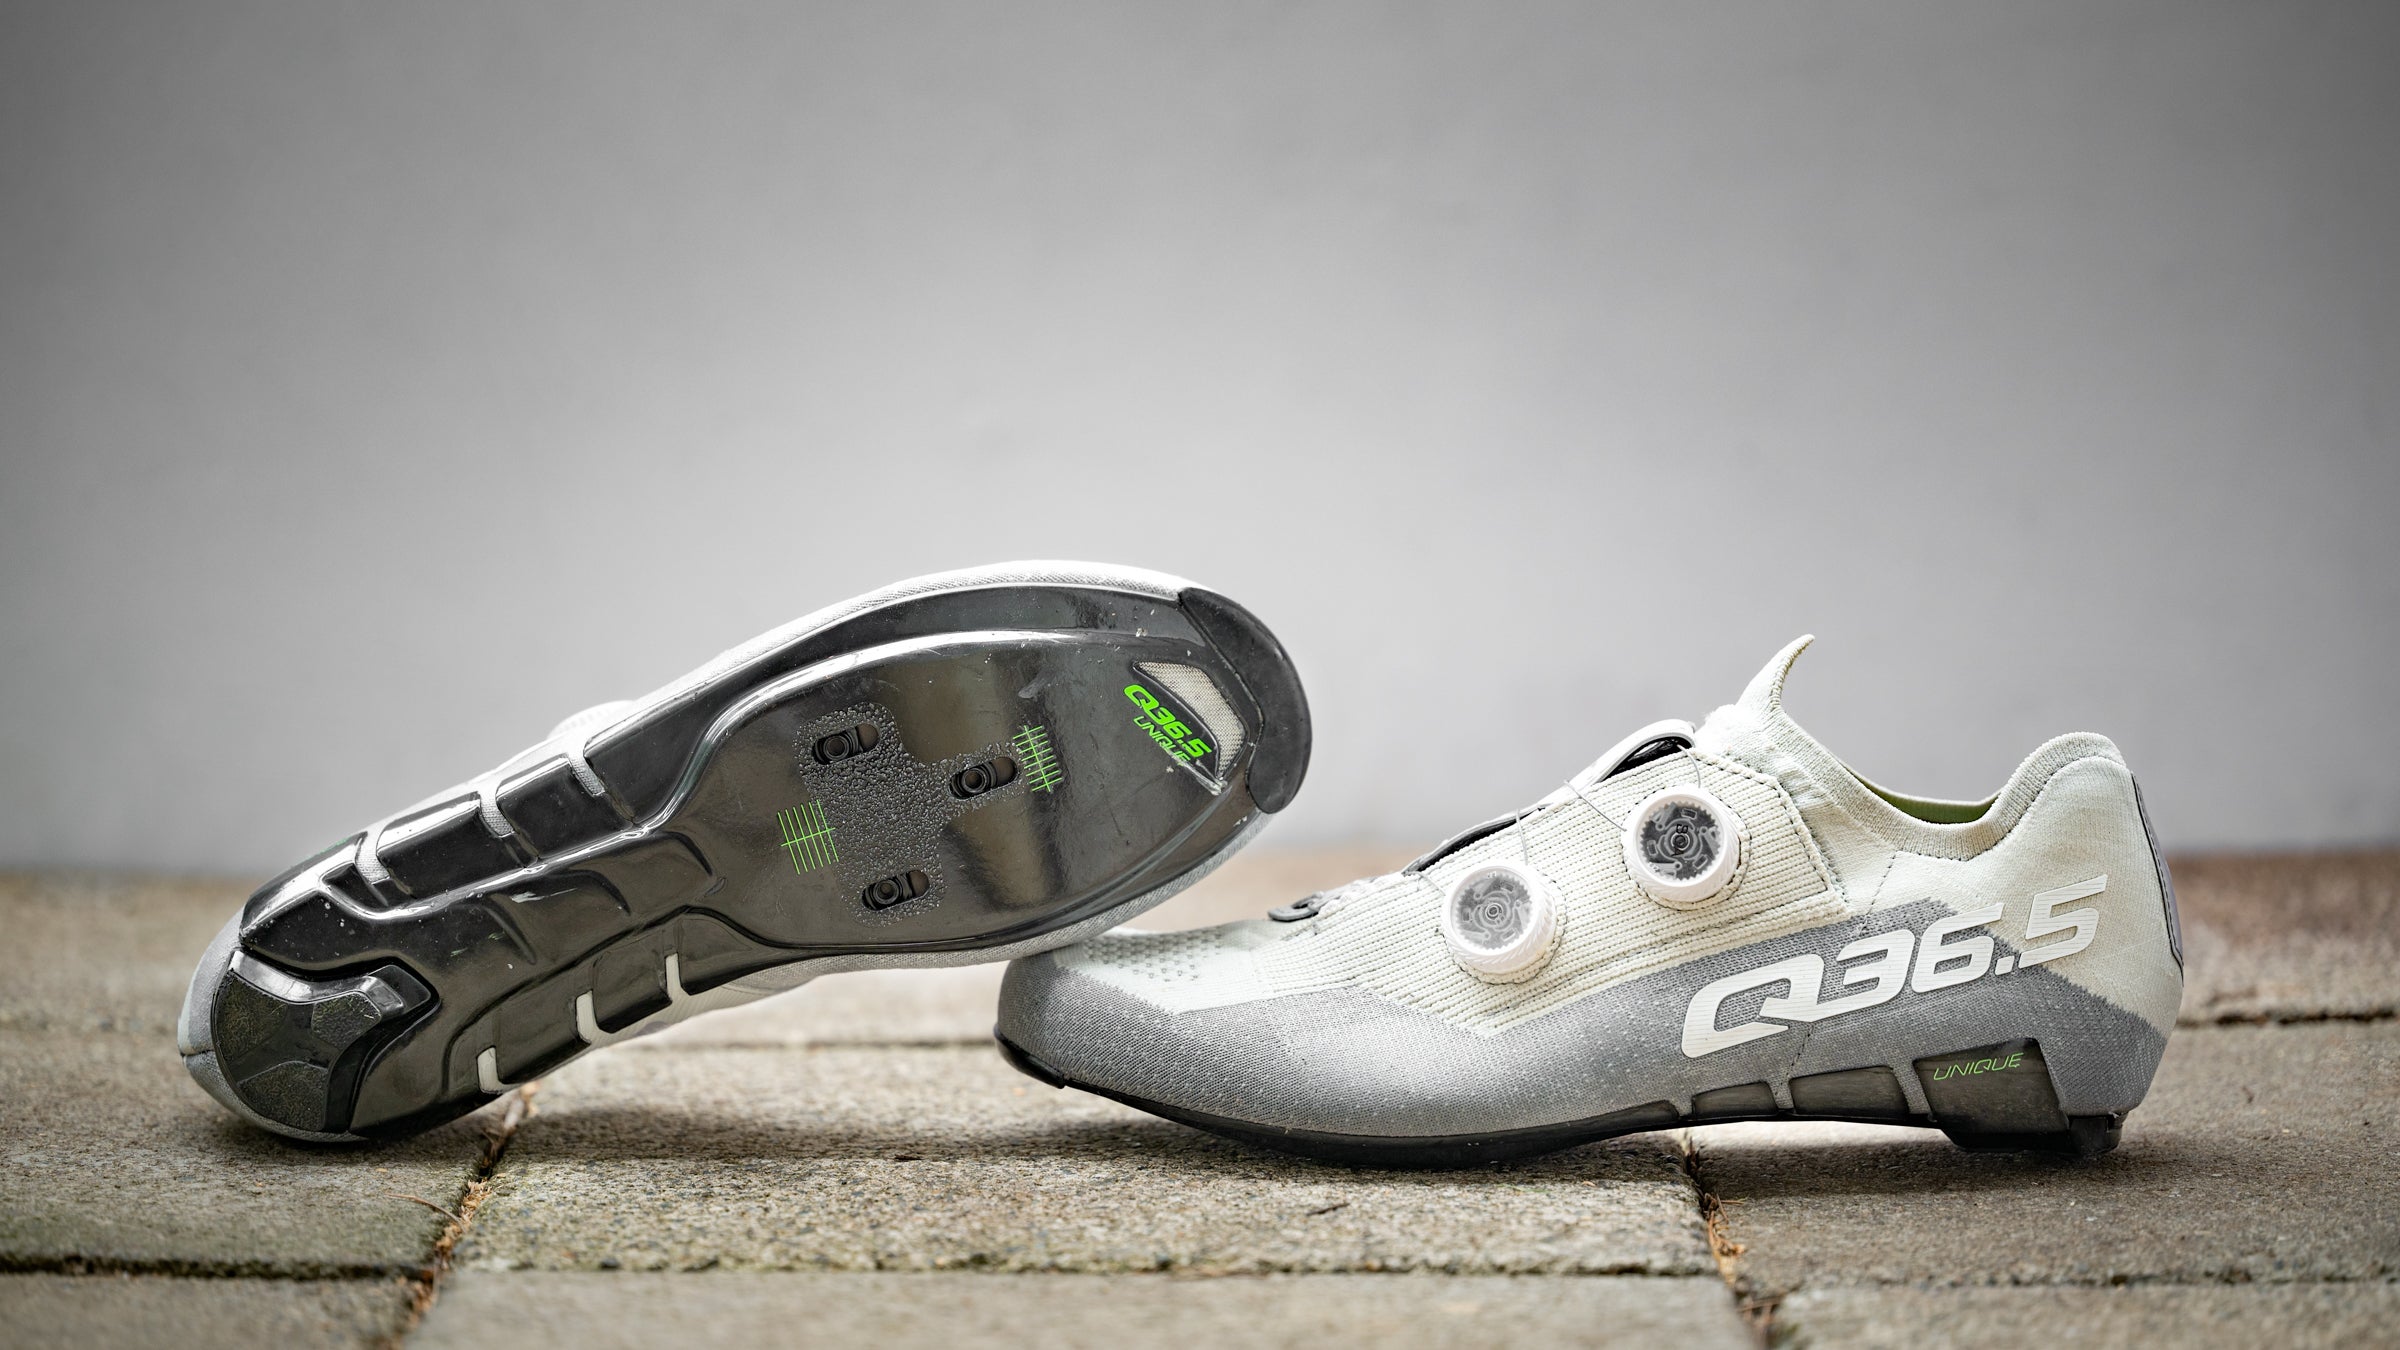 Review: Q36.5 Dottore Clima Road Shoes - Velo